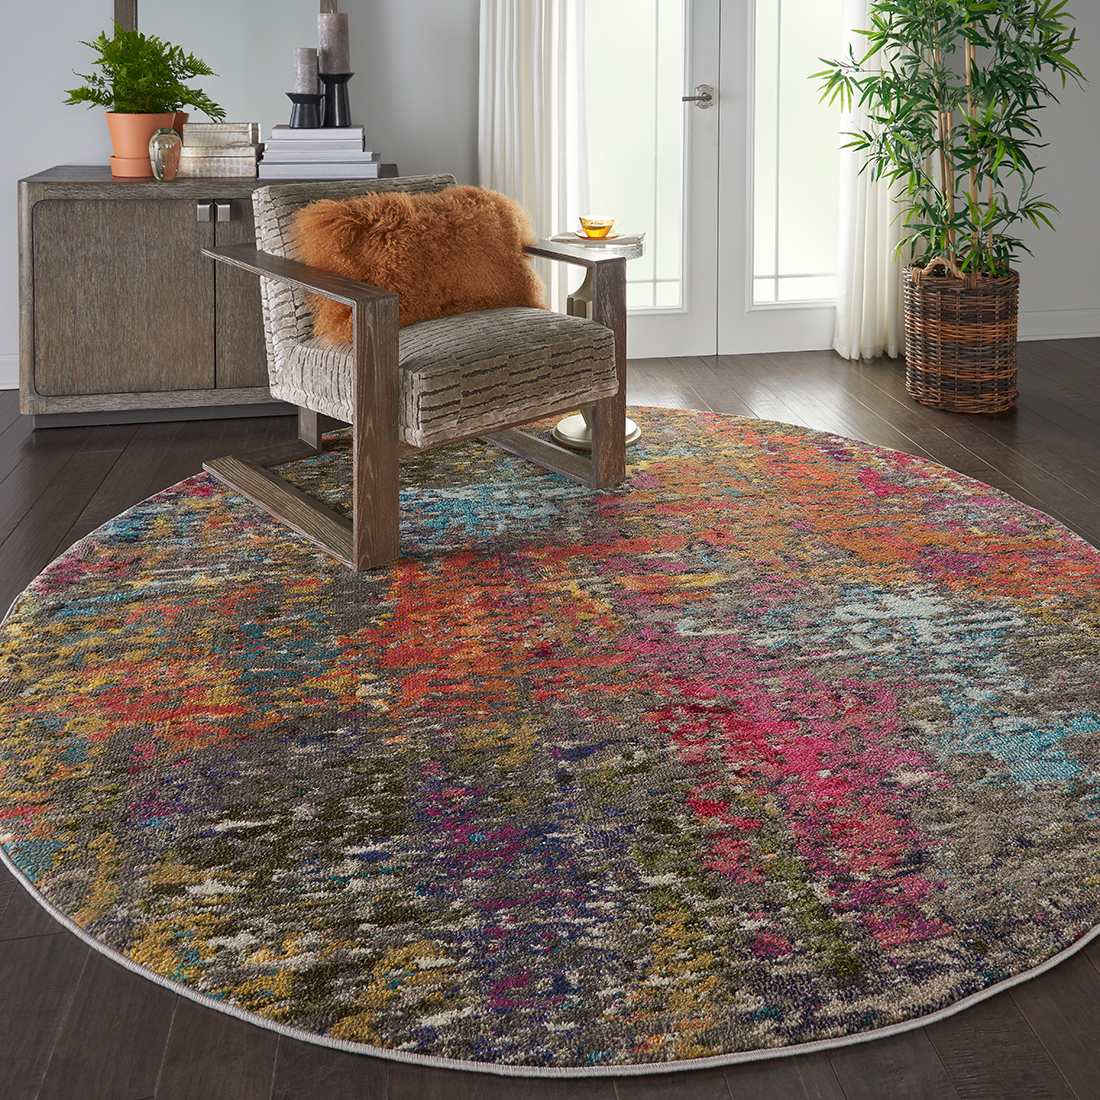 Nourison Rugs Celestial Round Rug - 1.6m x 1.6m in Sunset